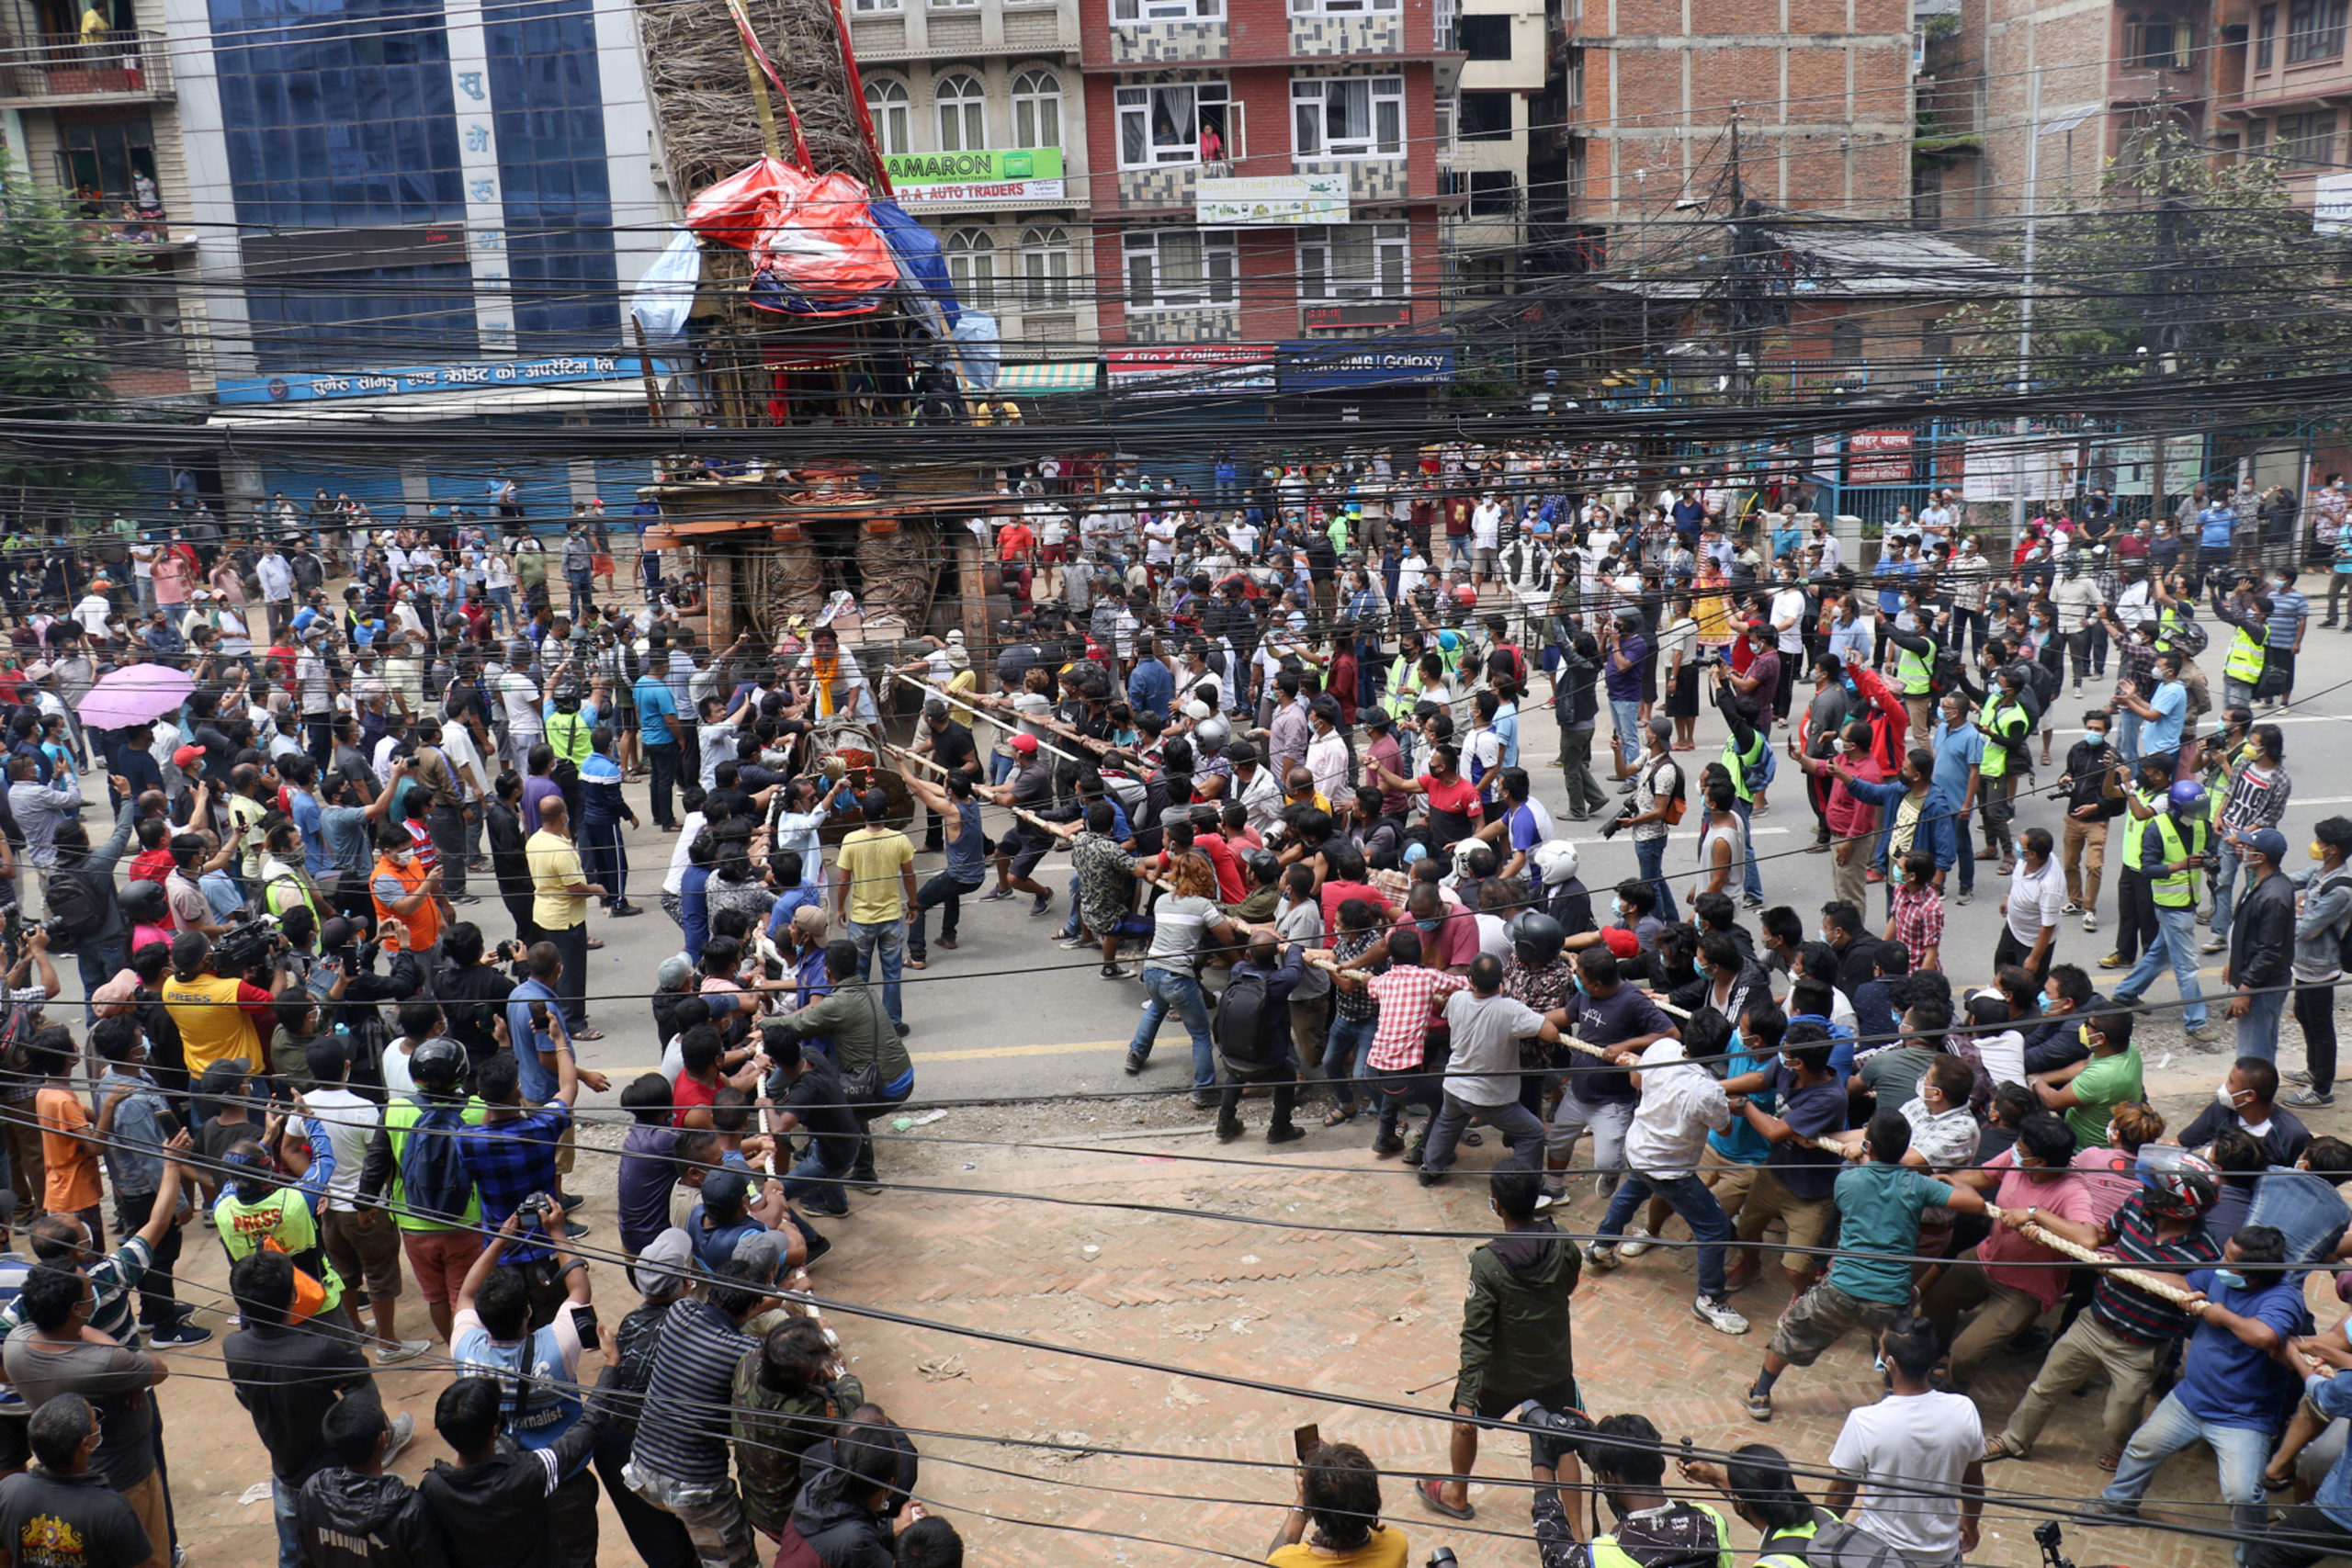 Astrologers concern over fixing inauspicious time for Rato Machhindranath chariot pulling